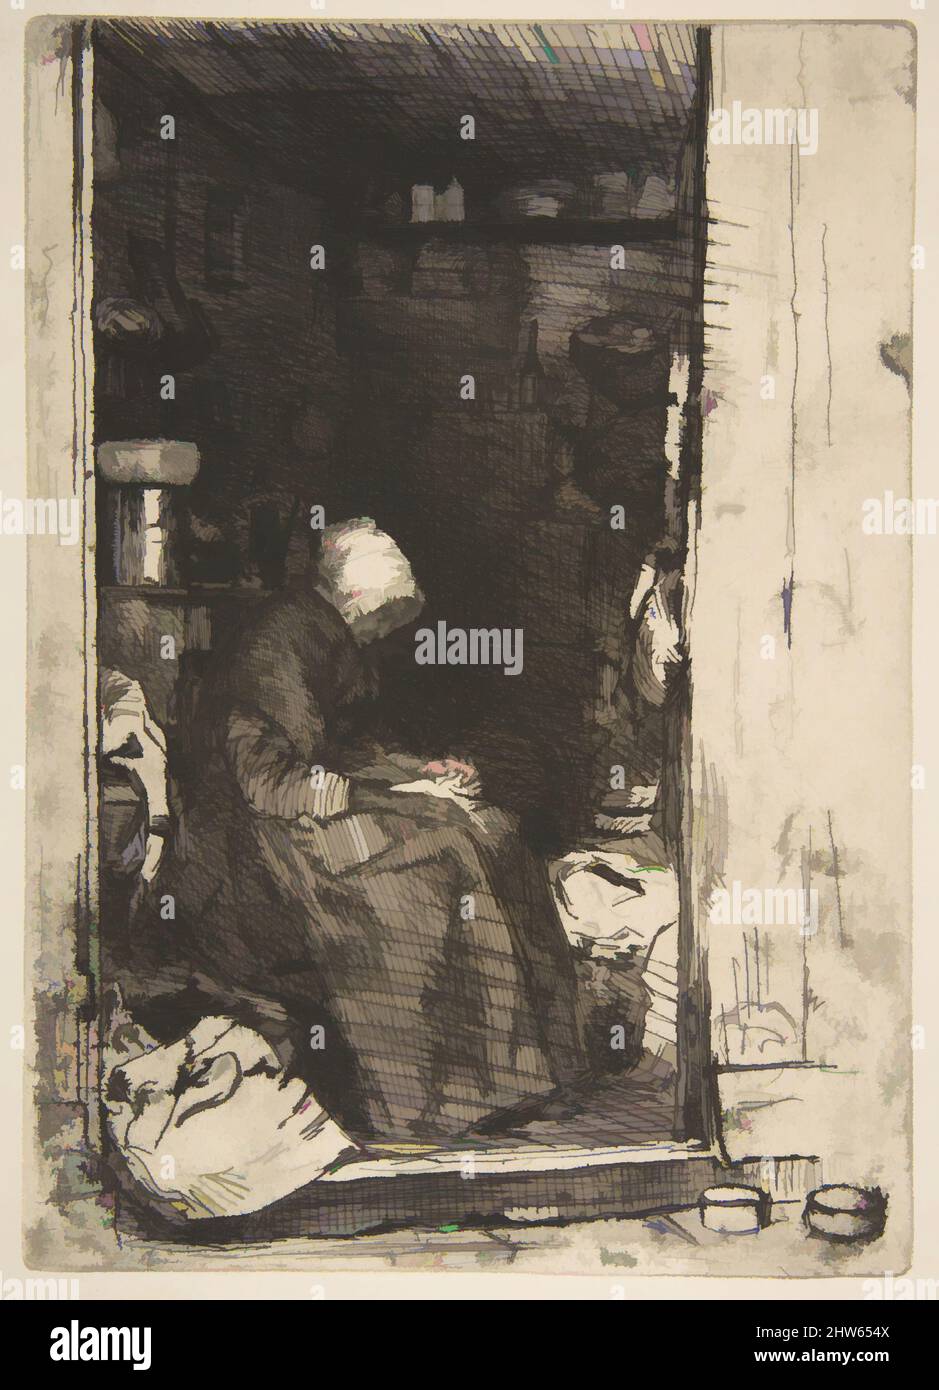 Art inspired by La Vieille aux Loques, 1858, Etching and drypoint; fourth state of four (Glasgow); a late impression printed in black ink on cream wove paper, Plate: 8 3/16 × 5 13/16 in. (20.8 × 14.8 cm), Prints, James McNeill Whistler (American, Lowell, Massachusetts 1834–1903 London, Classic works modernized by Artotop with a splash of modernity. Shapes, color and value, eye-catching visual impact on art. Emotions through freedom of artworks in a contemporary way. A timeless message pursuing a wildly creative new direction. Artists turning to the digital medium and creating the Artotop NFT Stock Photo